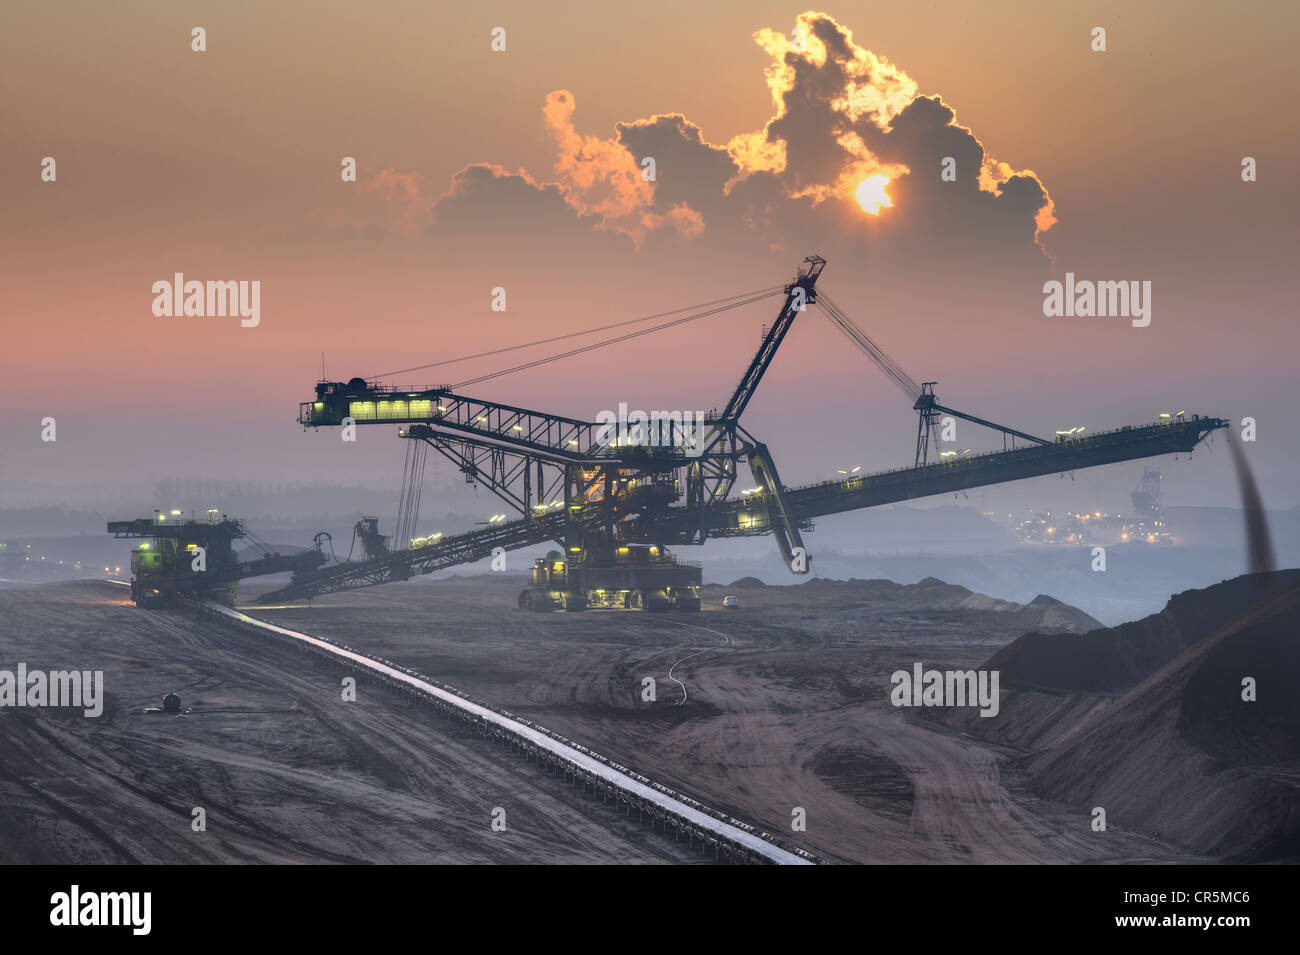 Spreaders in an open-cast lignite mine in the early morning, Garzweiler, North Rhine-Westphalia, Germany, Europe Stock Photo